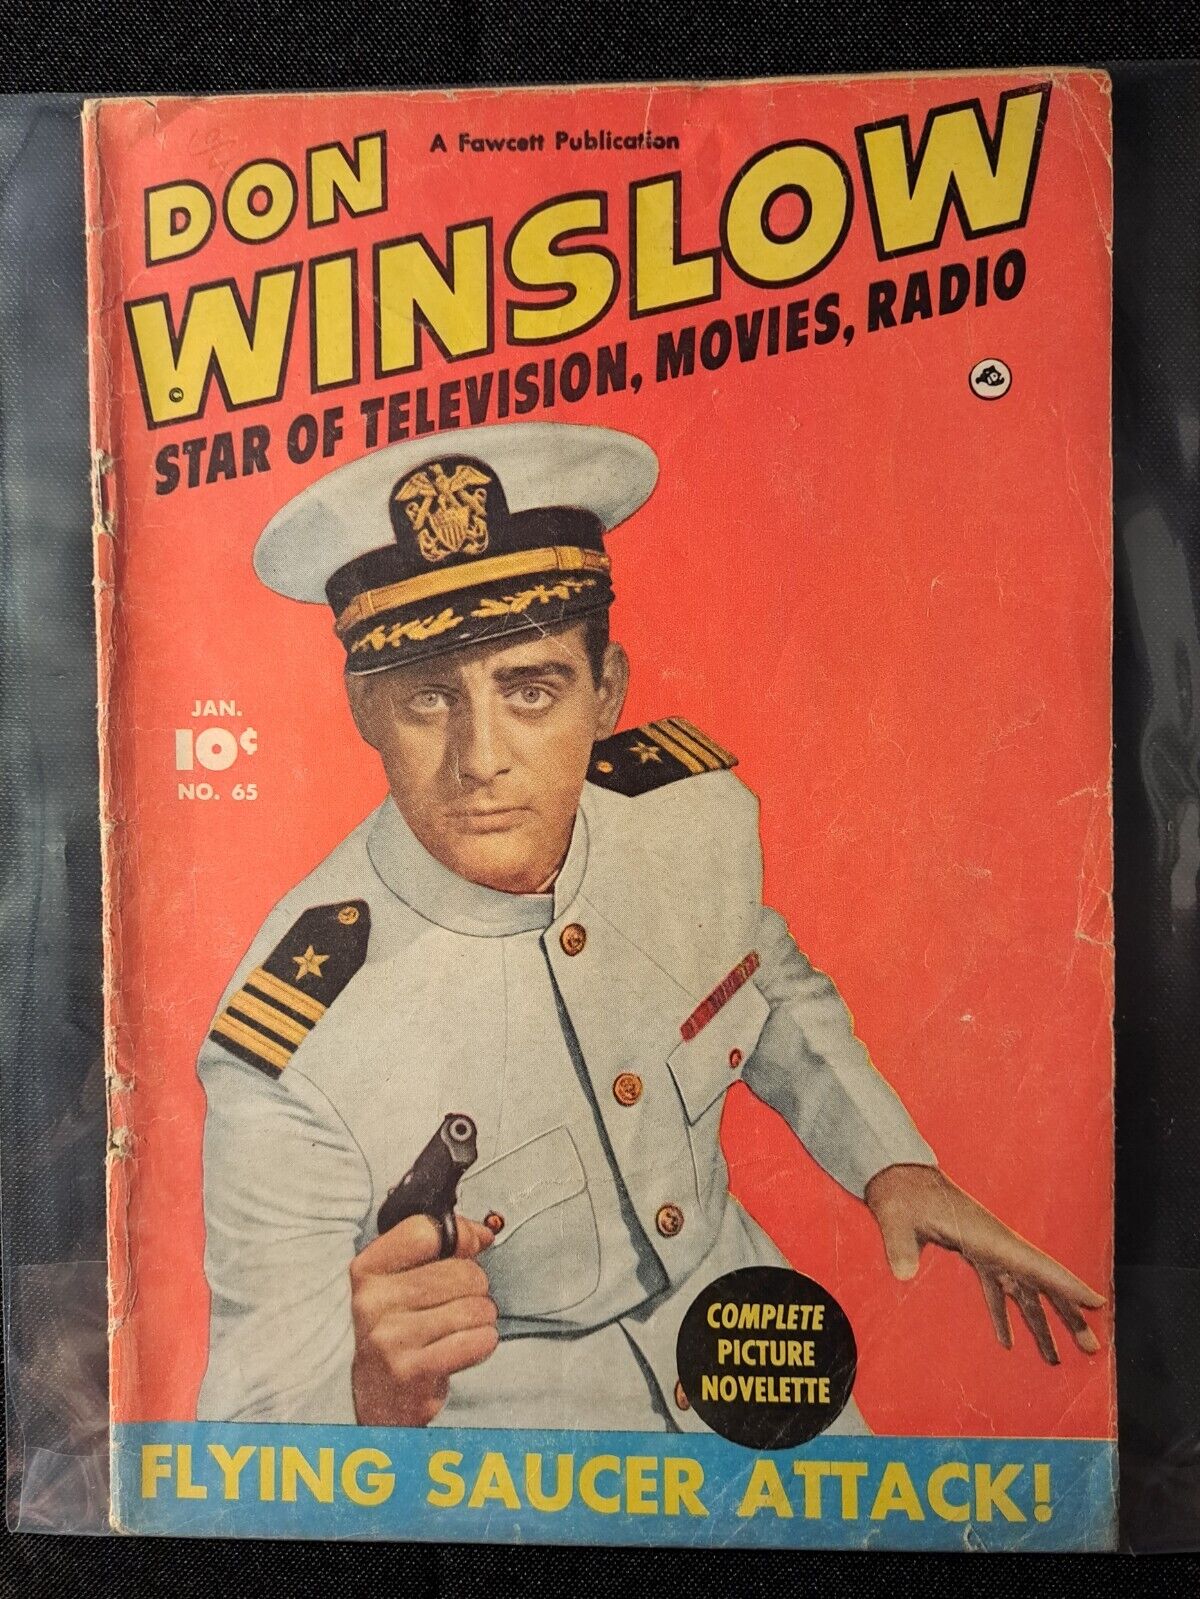 Don Winslow Star of Television Movies Radio Jan 10 cent 65 Fawcett Publication